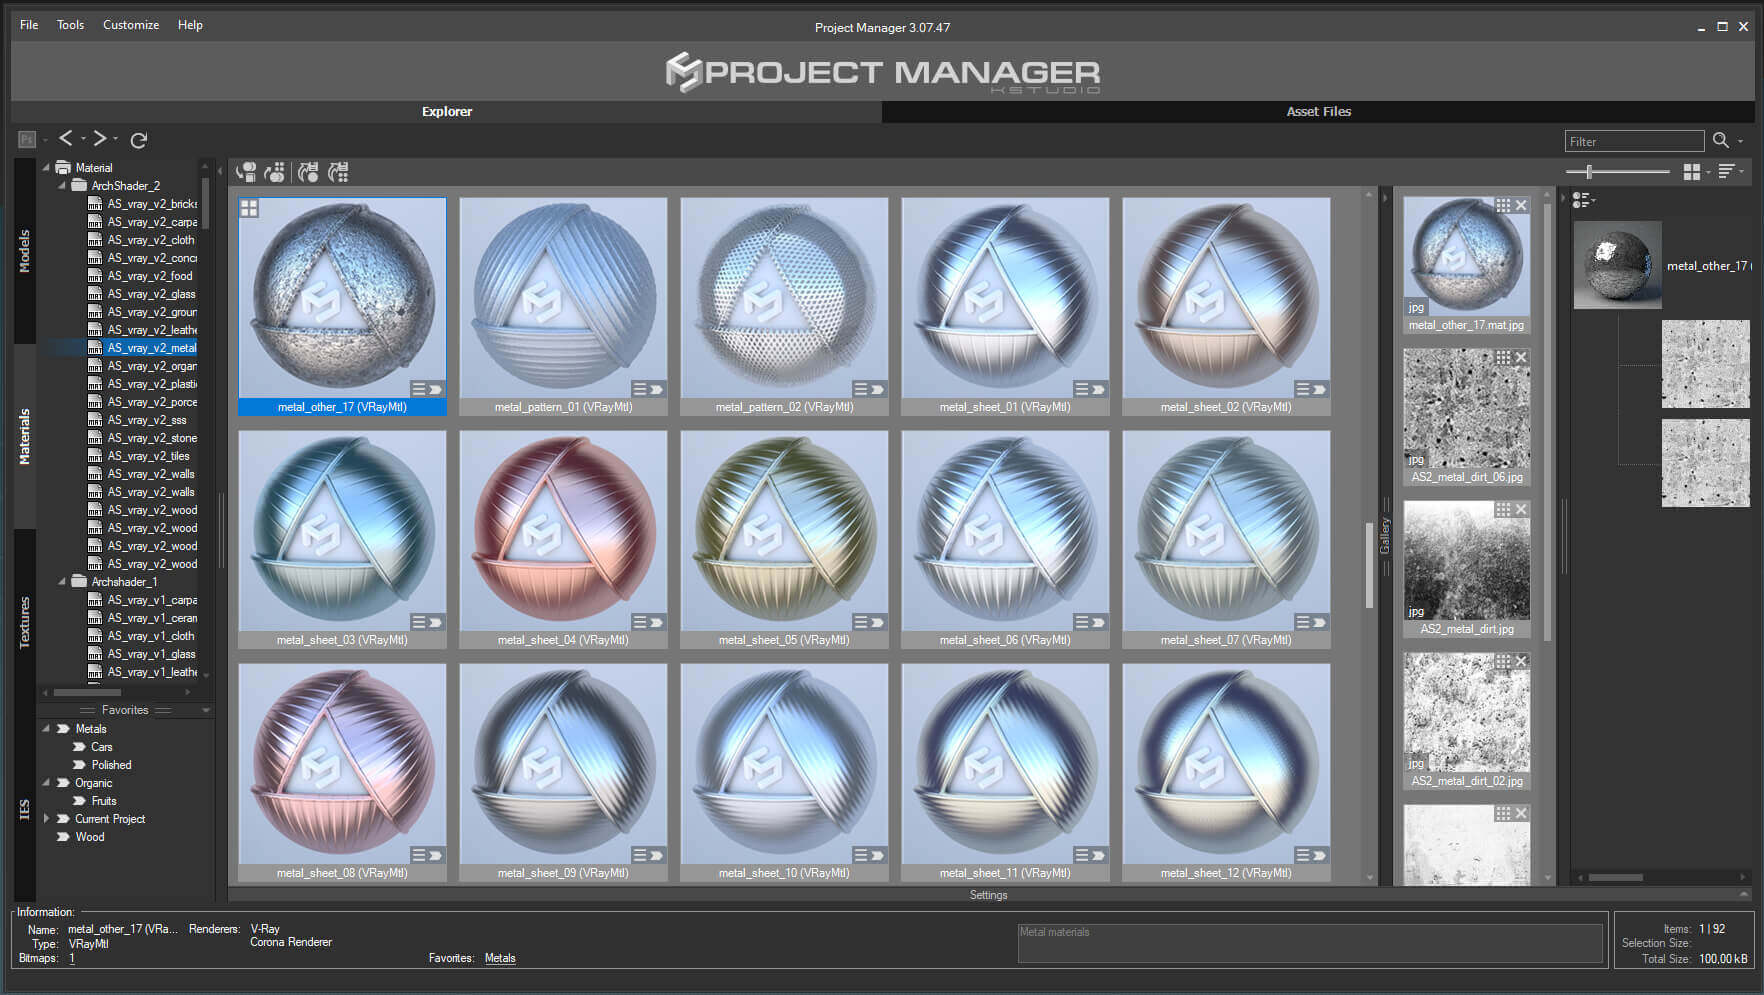 How to get more material slots in 3ds max 4